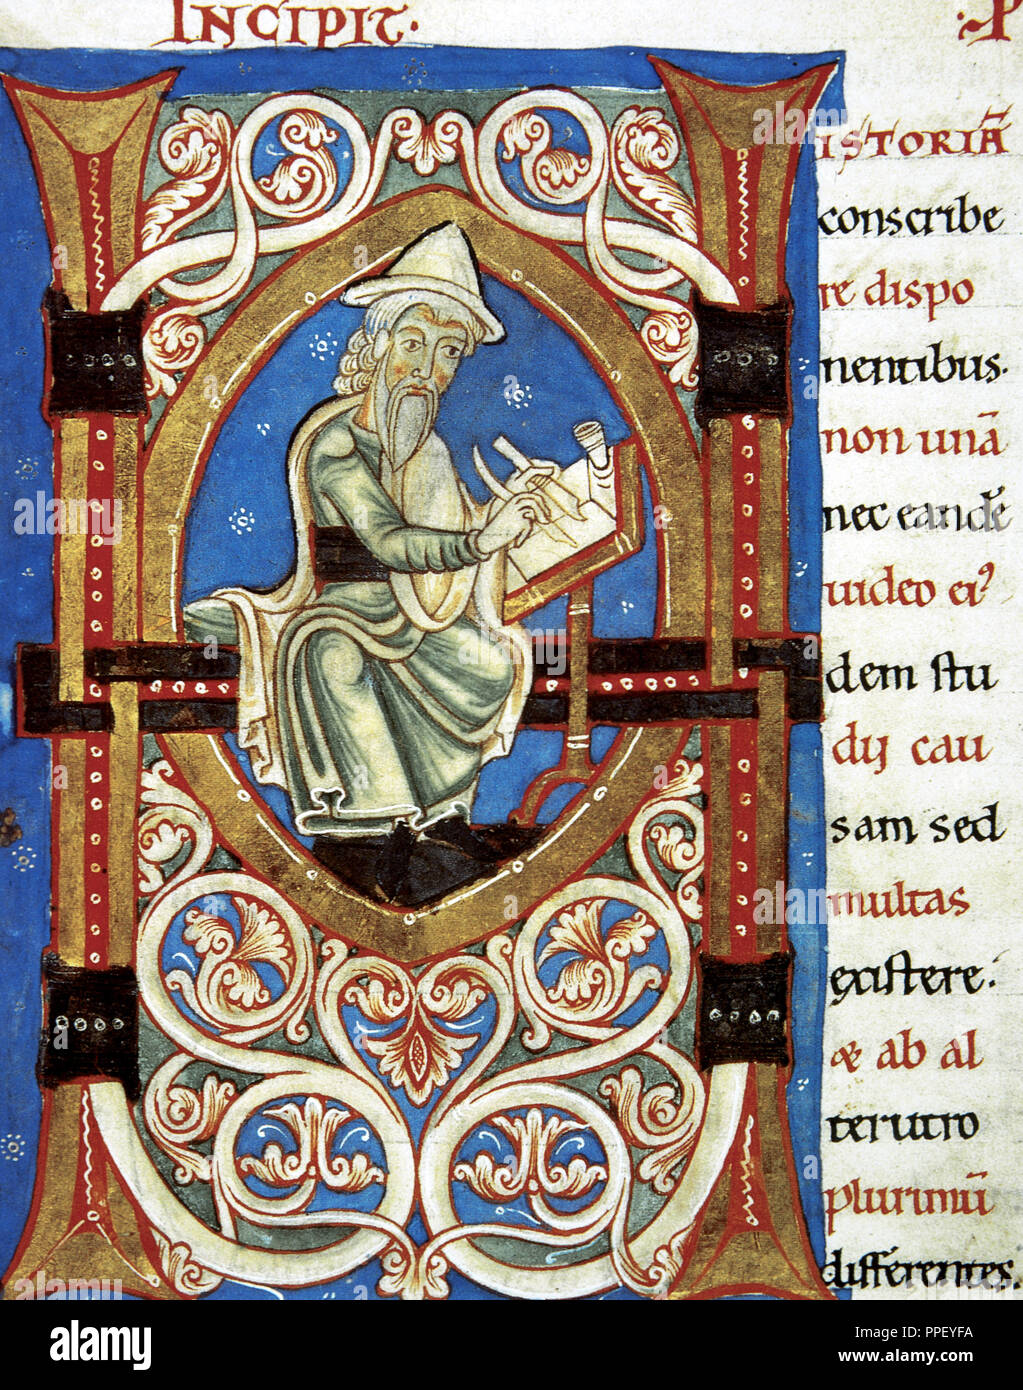 Jewish history and wars. Initial with image (amanuensis). Letter H. Manuscript. 15th century.  Chantilly Castle. France. Stock Photo